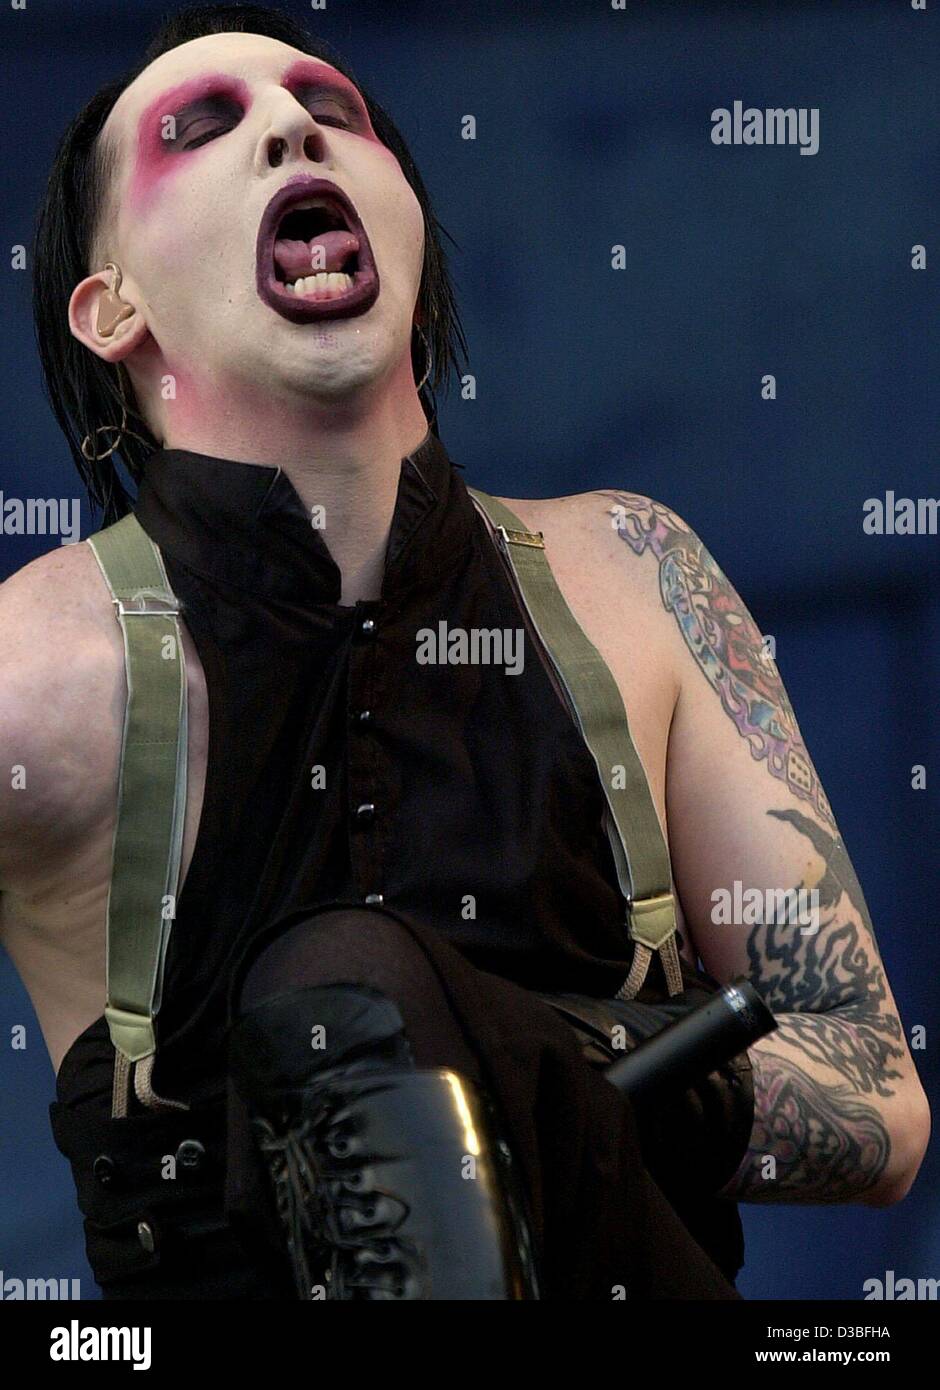 (dpa) - US shock rocker Marilyn Manson alias Brian Warner performs during the Rock am Ring (rock at the ring) open air festival on the Nuerburgring race track, Germany, 8 June 2003. Marilyn Manson took on his alias in 1989, made up of the names of the late Hollywood diva Marilyn Monroe and the mass  Stock Photo